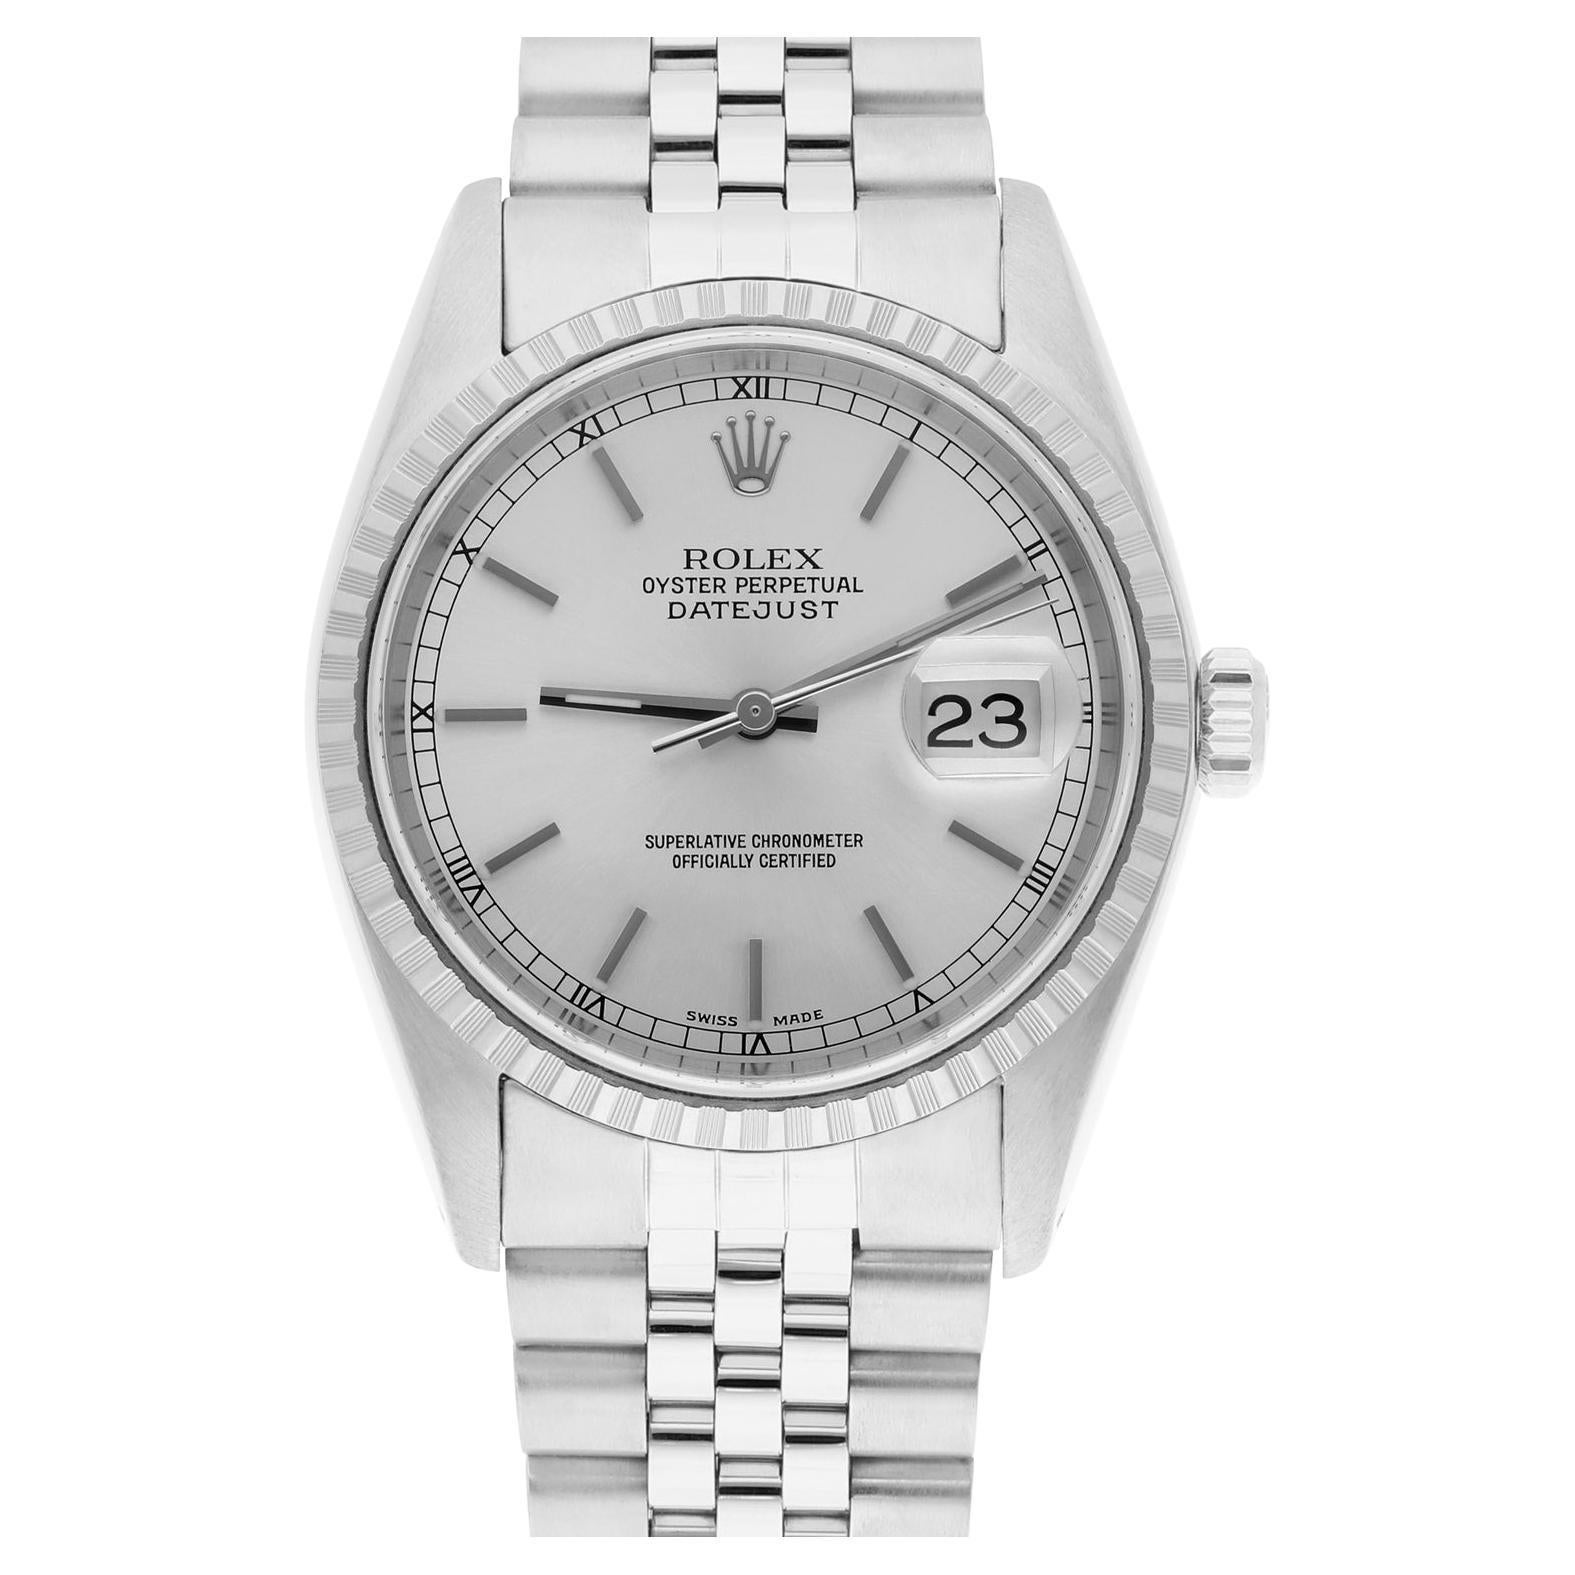 Rolex Datejust 36mm Stainless Steel 16030 Silver RT Index Dial, Circa 1984 For Sale